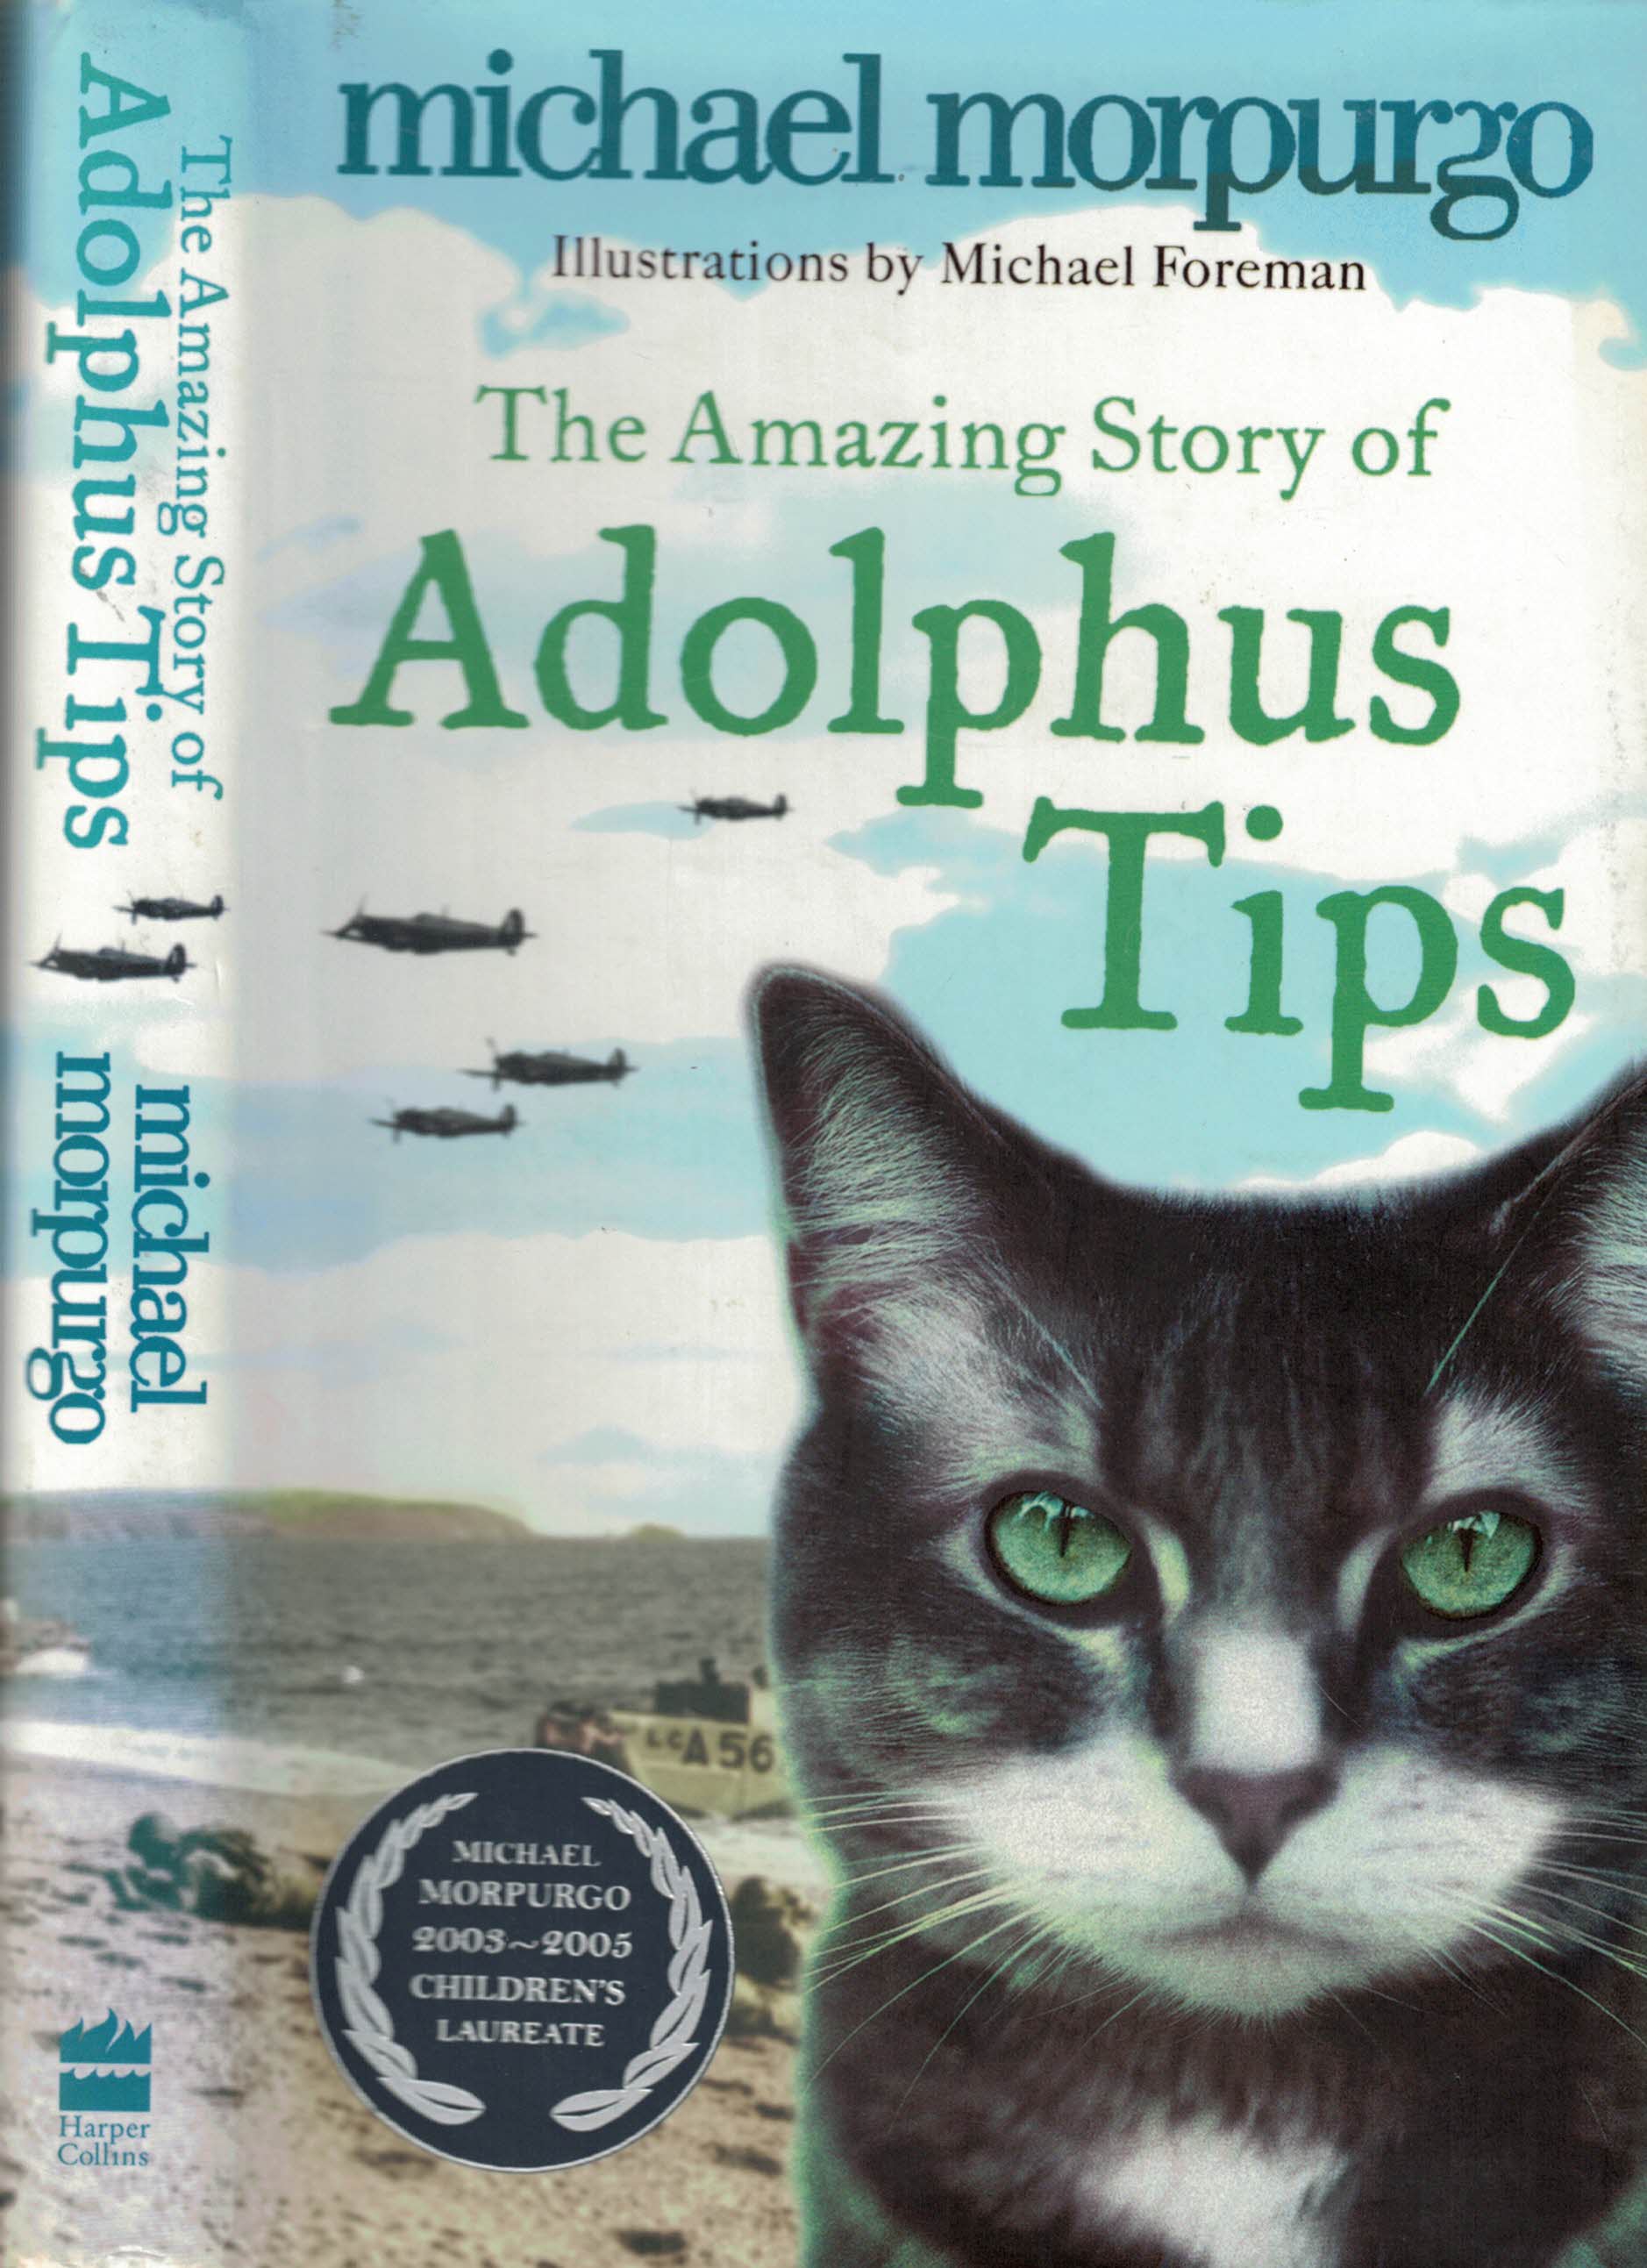 The Amazing Story of Adolphus Tips. Signed copy.